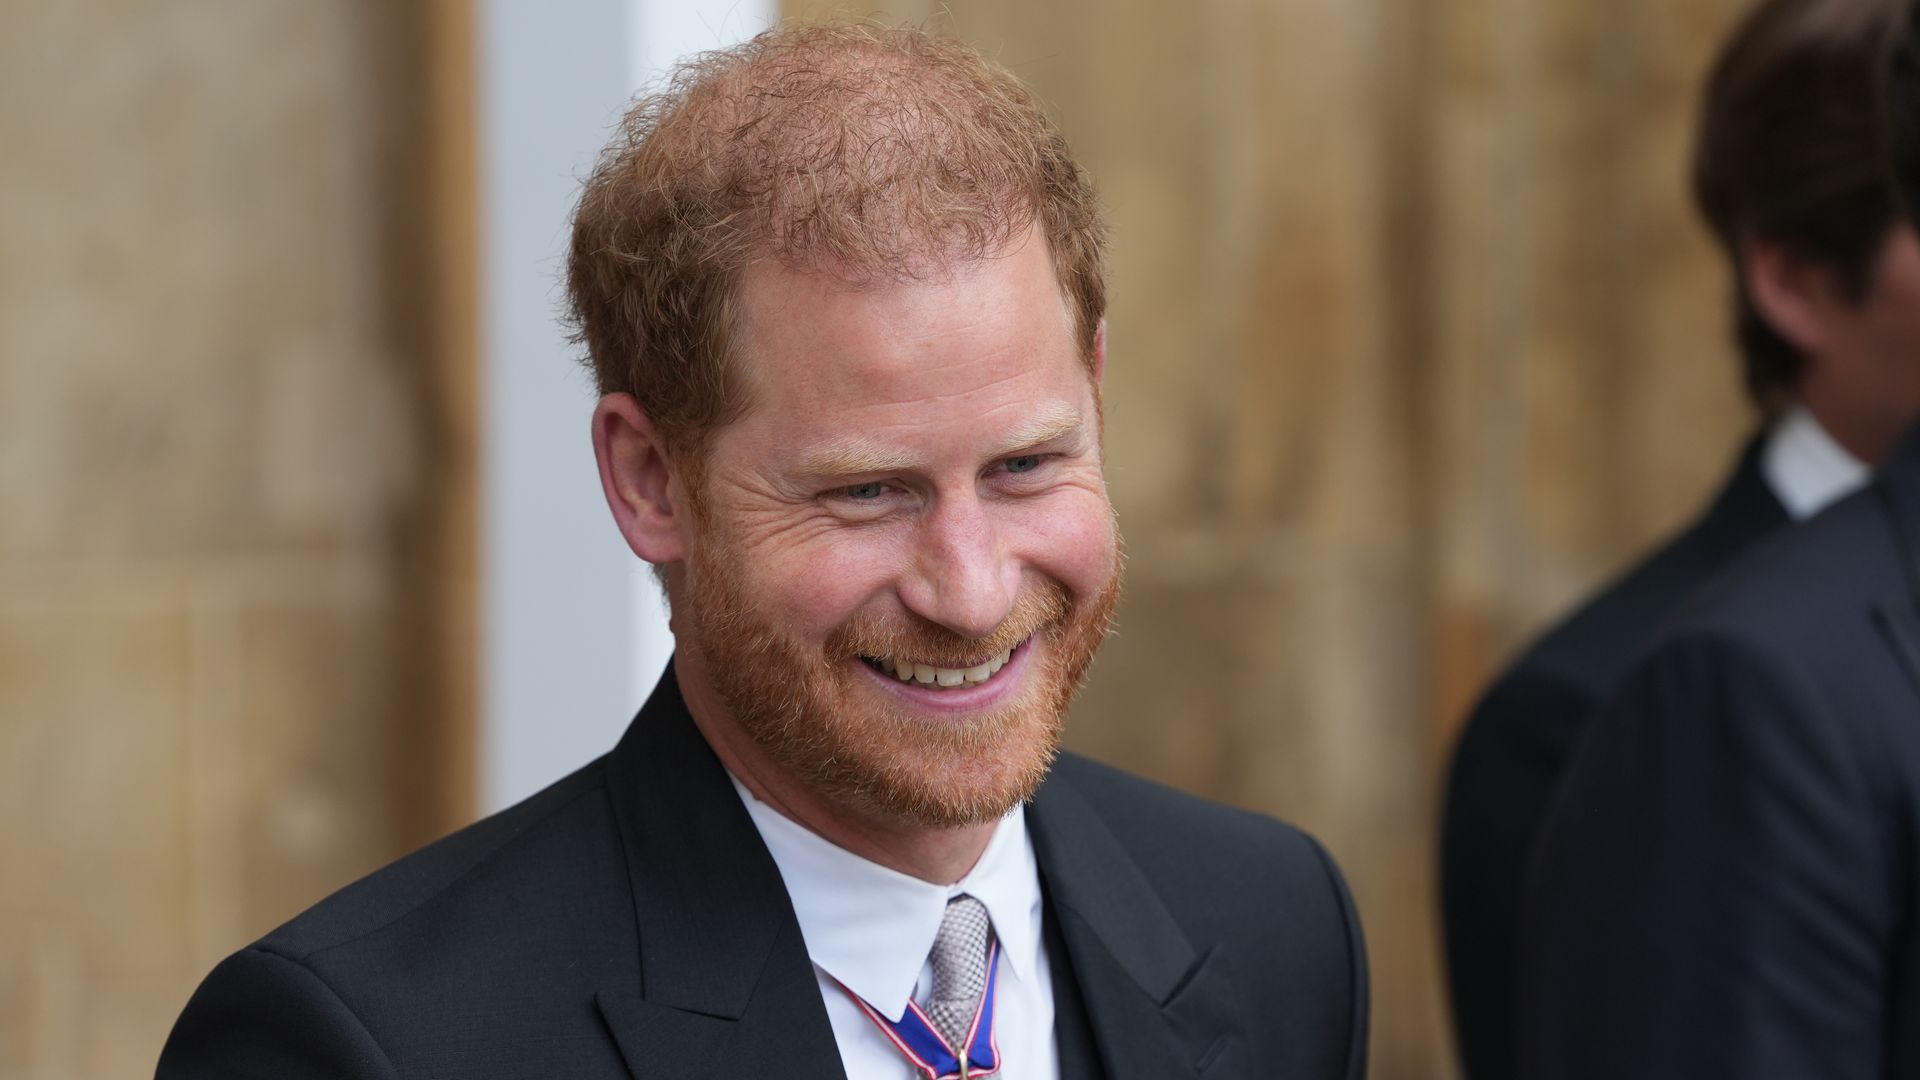 Prince Harry smiling in a black suit